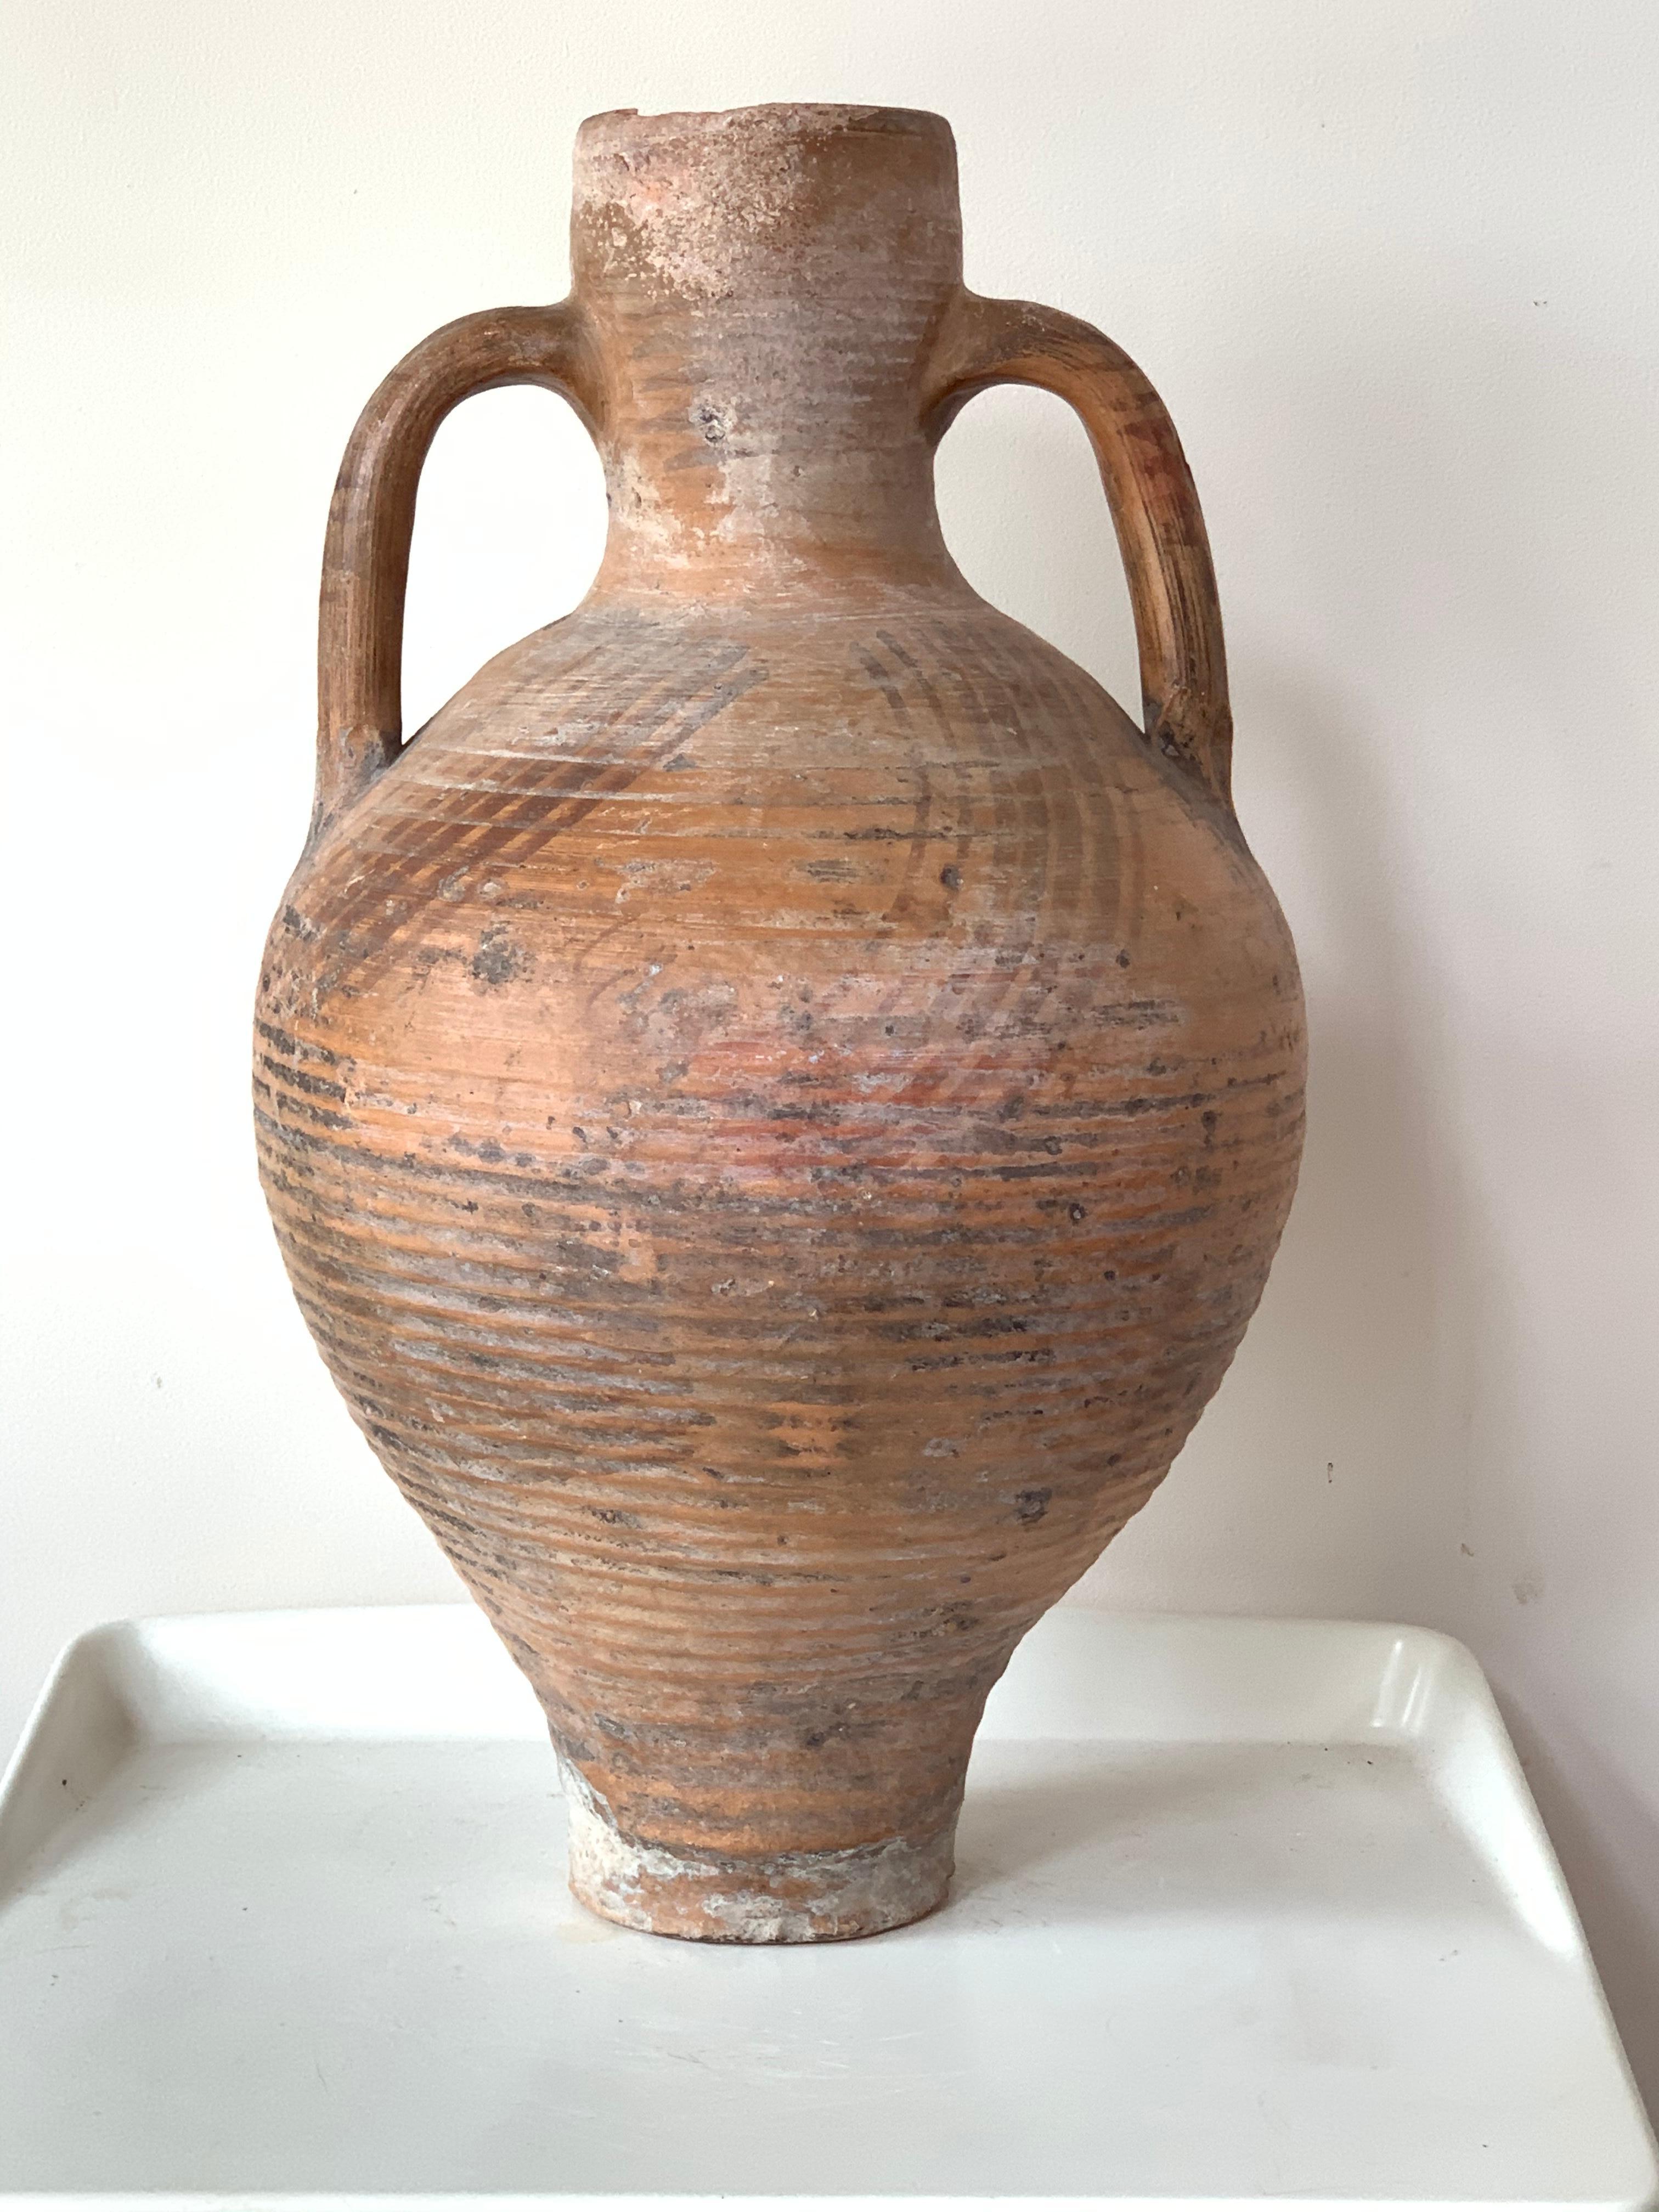 Pitcher ‘cantaros’ from Calanda, Aragon-Zaragoza area of Spain. A rare piece from a Private collection, circa 1890. Other examples can be seen in the Museo de Zaragoza.
With gorgeous original patina, this jar features the characteristic